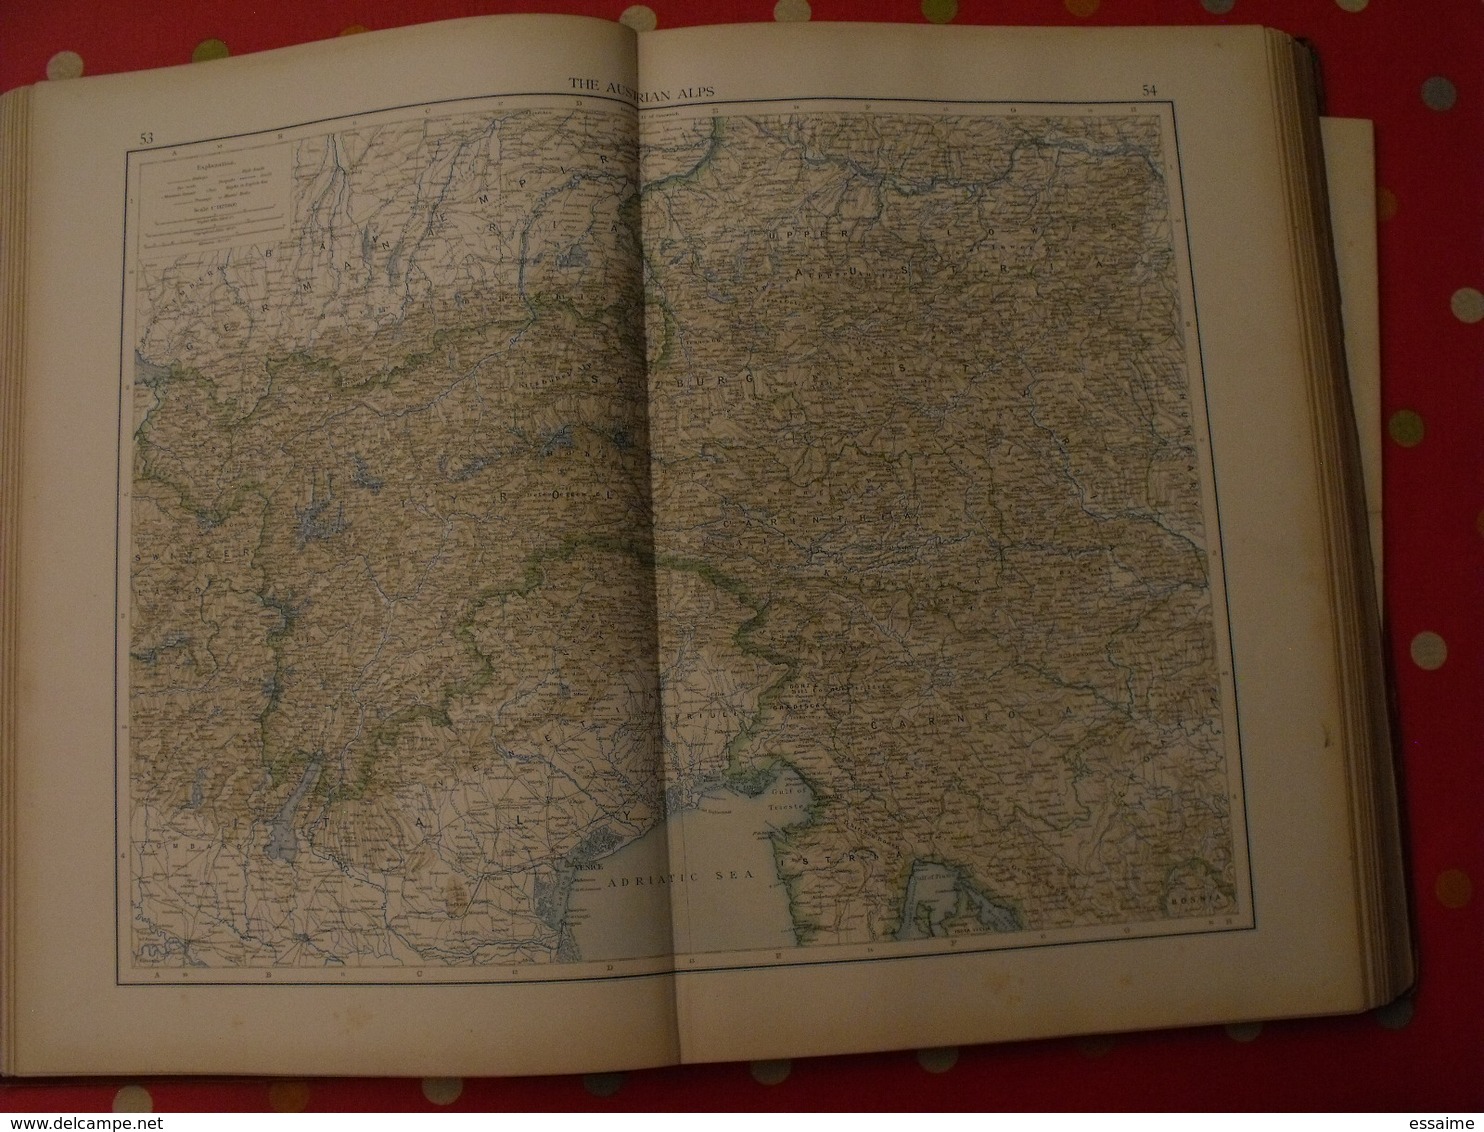 "the Times" Atlas published at the office of "the Times" 1900. 132 pages of Maps (196 Maps) + alphabetical index